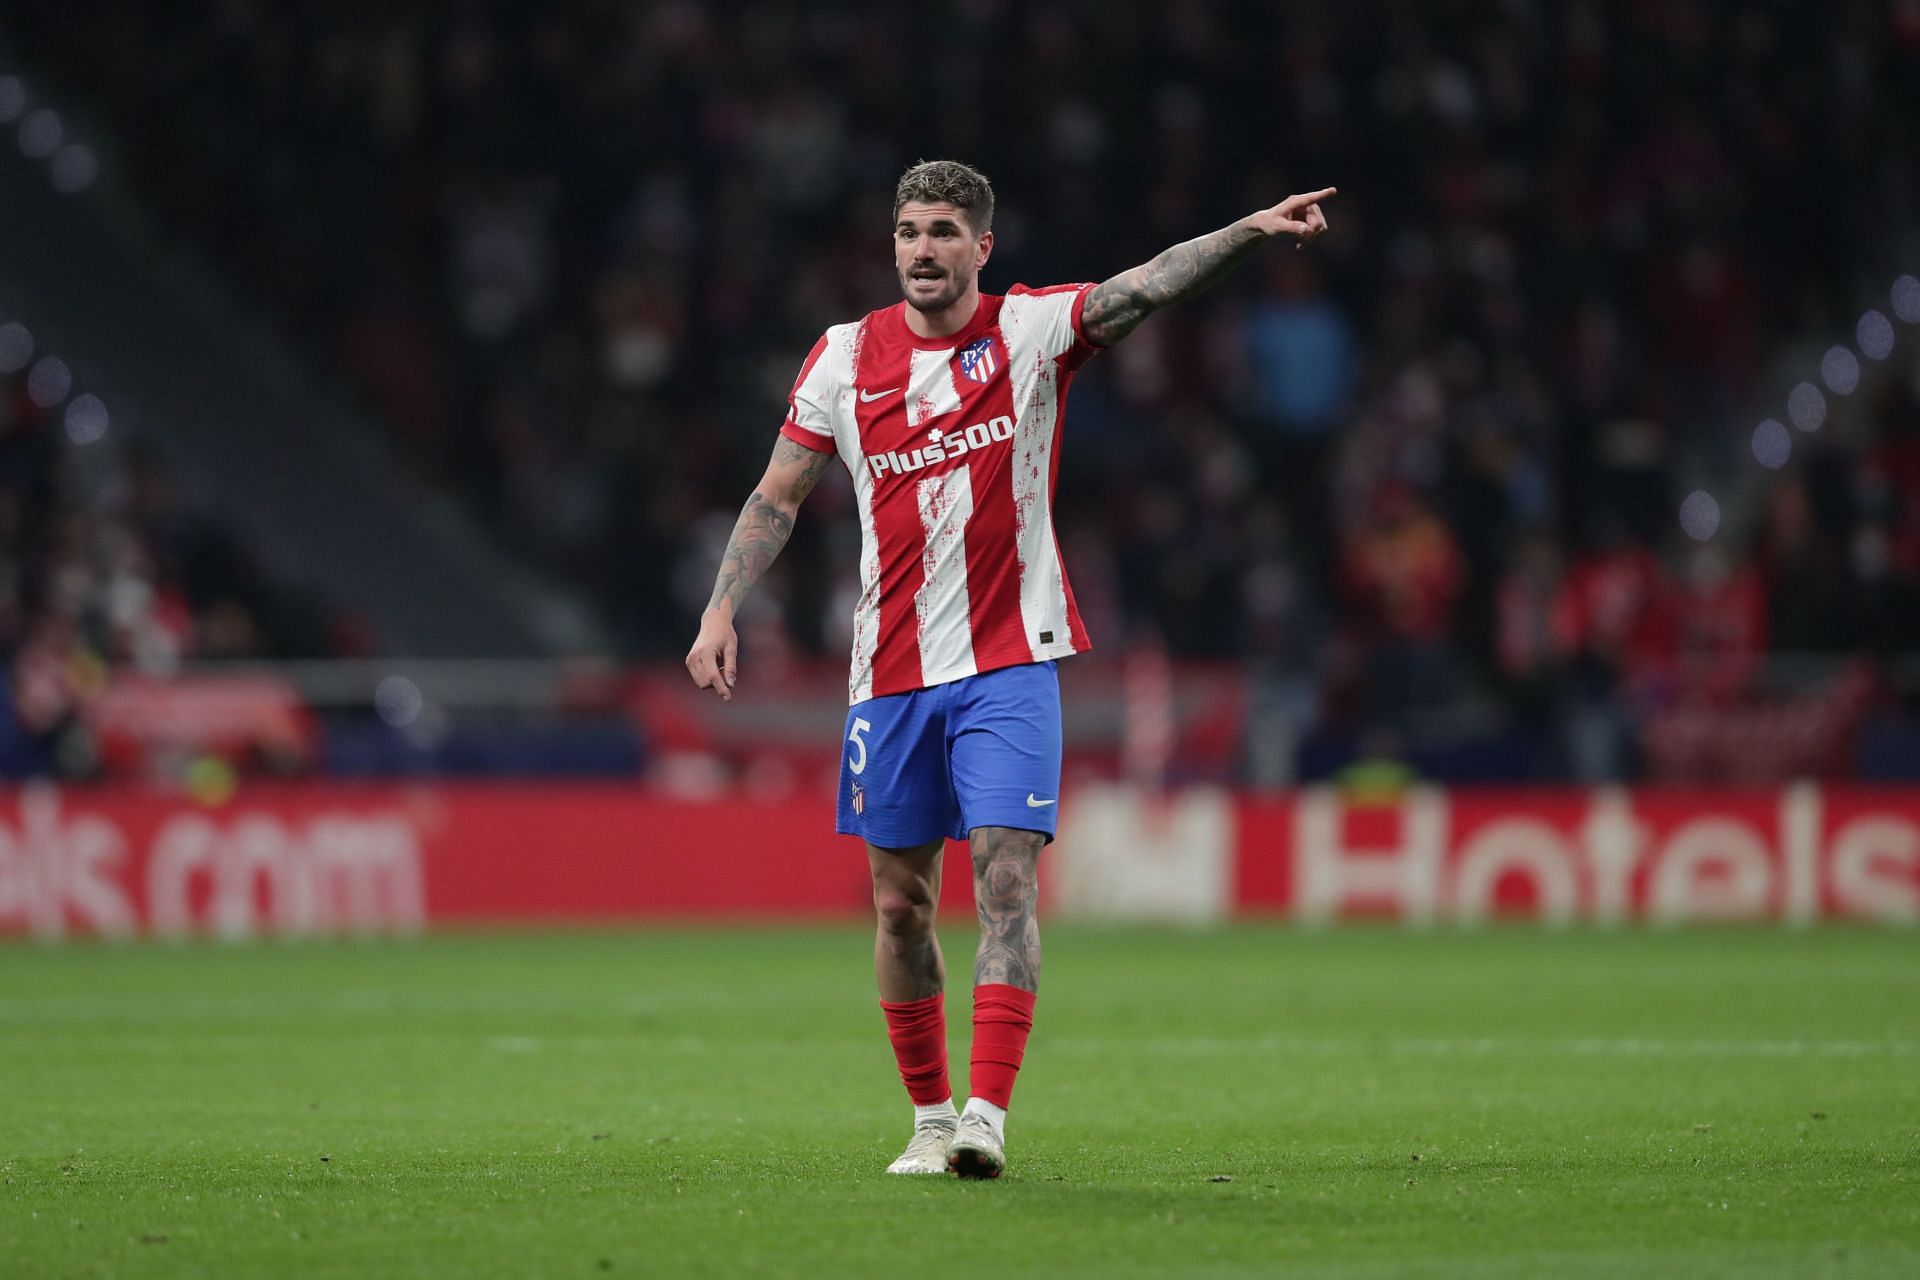 Atletico Madrid will face Porto on Tuesday: Group B - UEFA Champions League